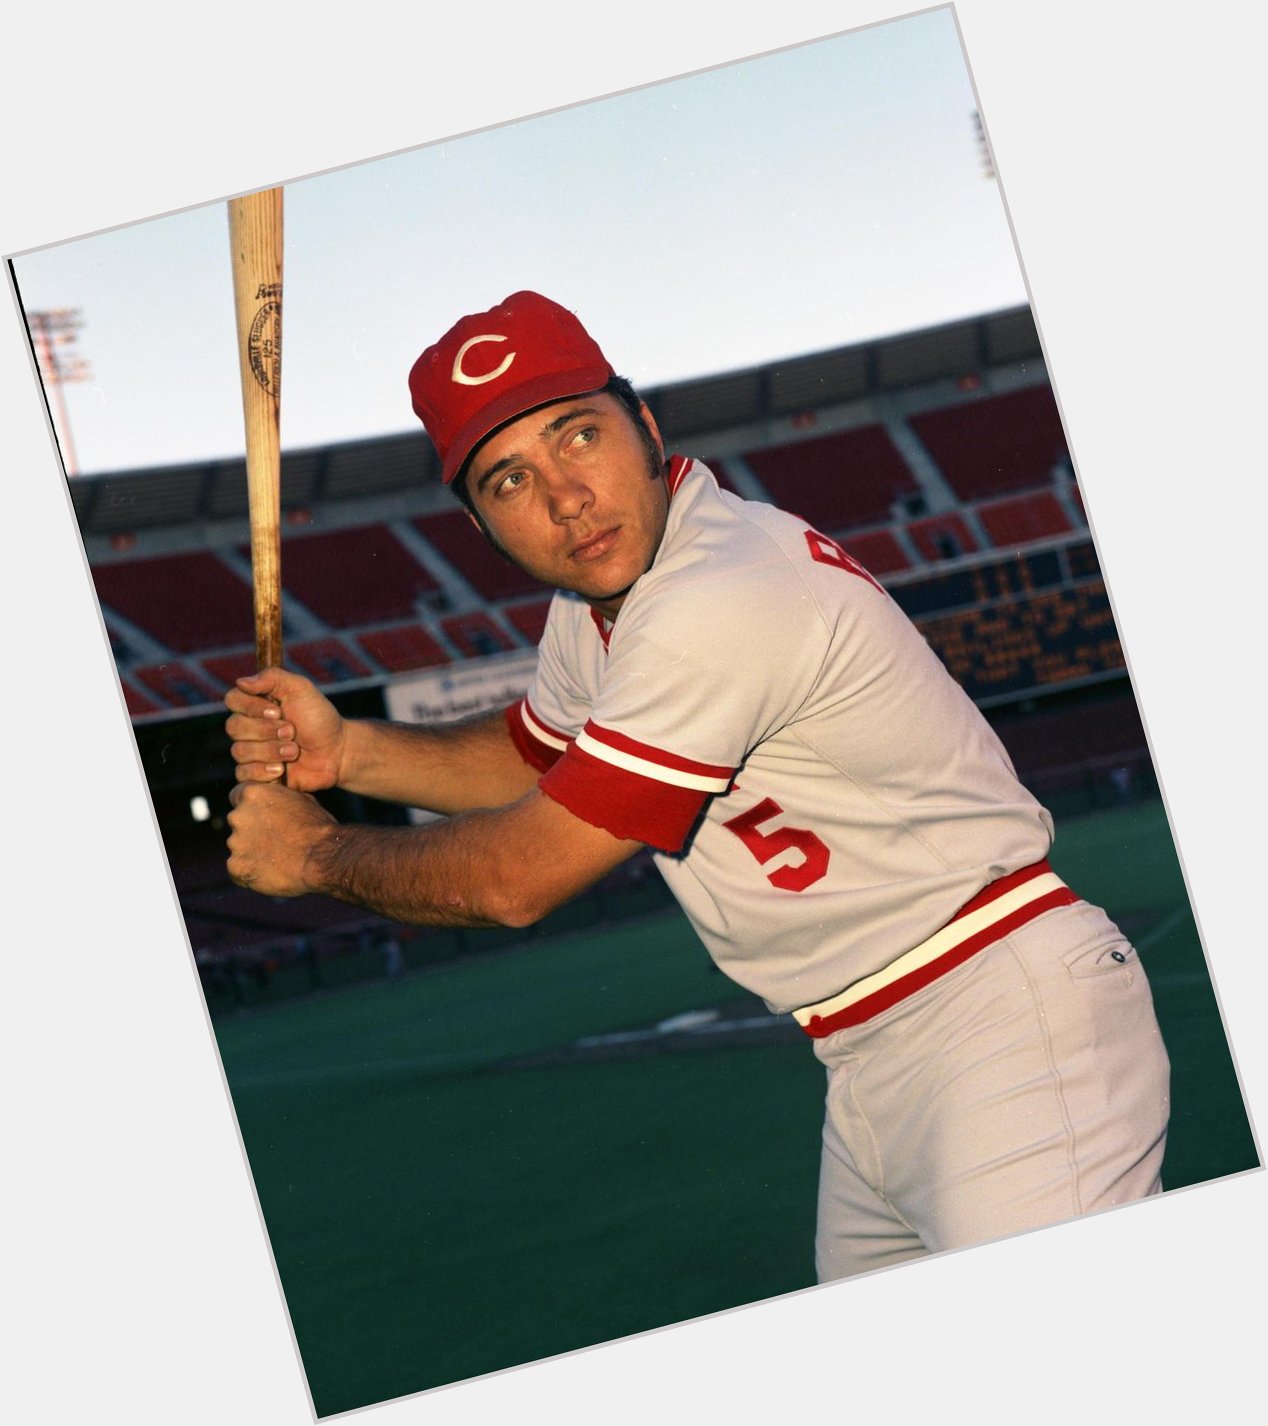 Happy 67th birthday to Johnny Bench, the catcher of all time by Hall Rating.  